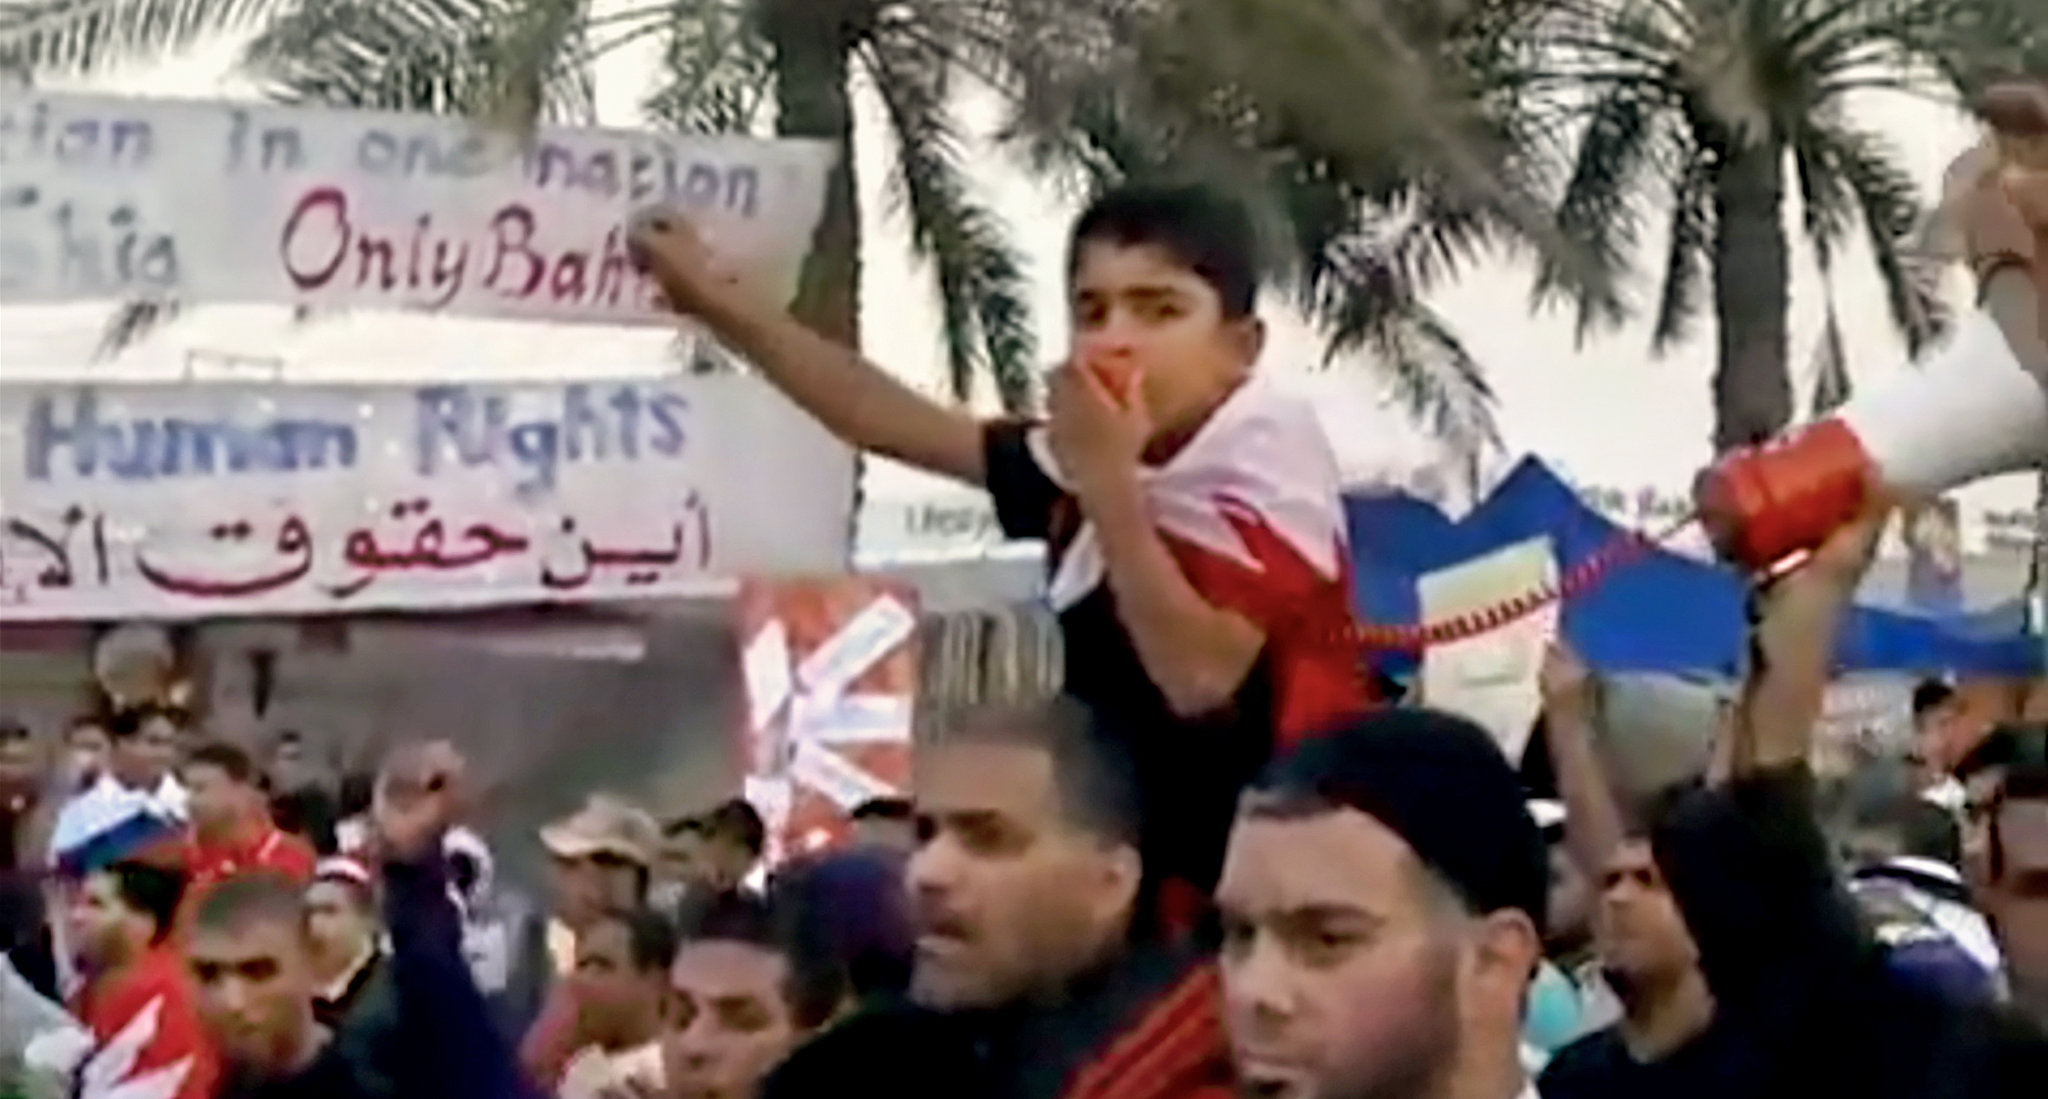 A boy leading chants in Bahrain in Peter Snowdon’s 2014 film “The Uprising,” based on YouTube videos uploaded by protesters during the Arab Spring